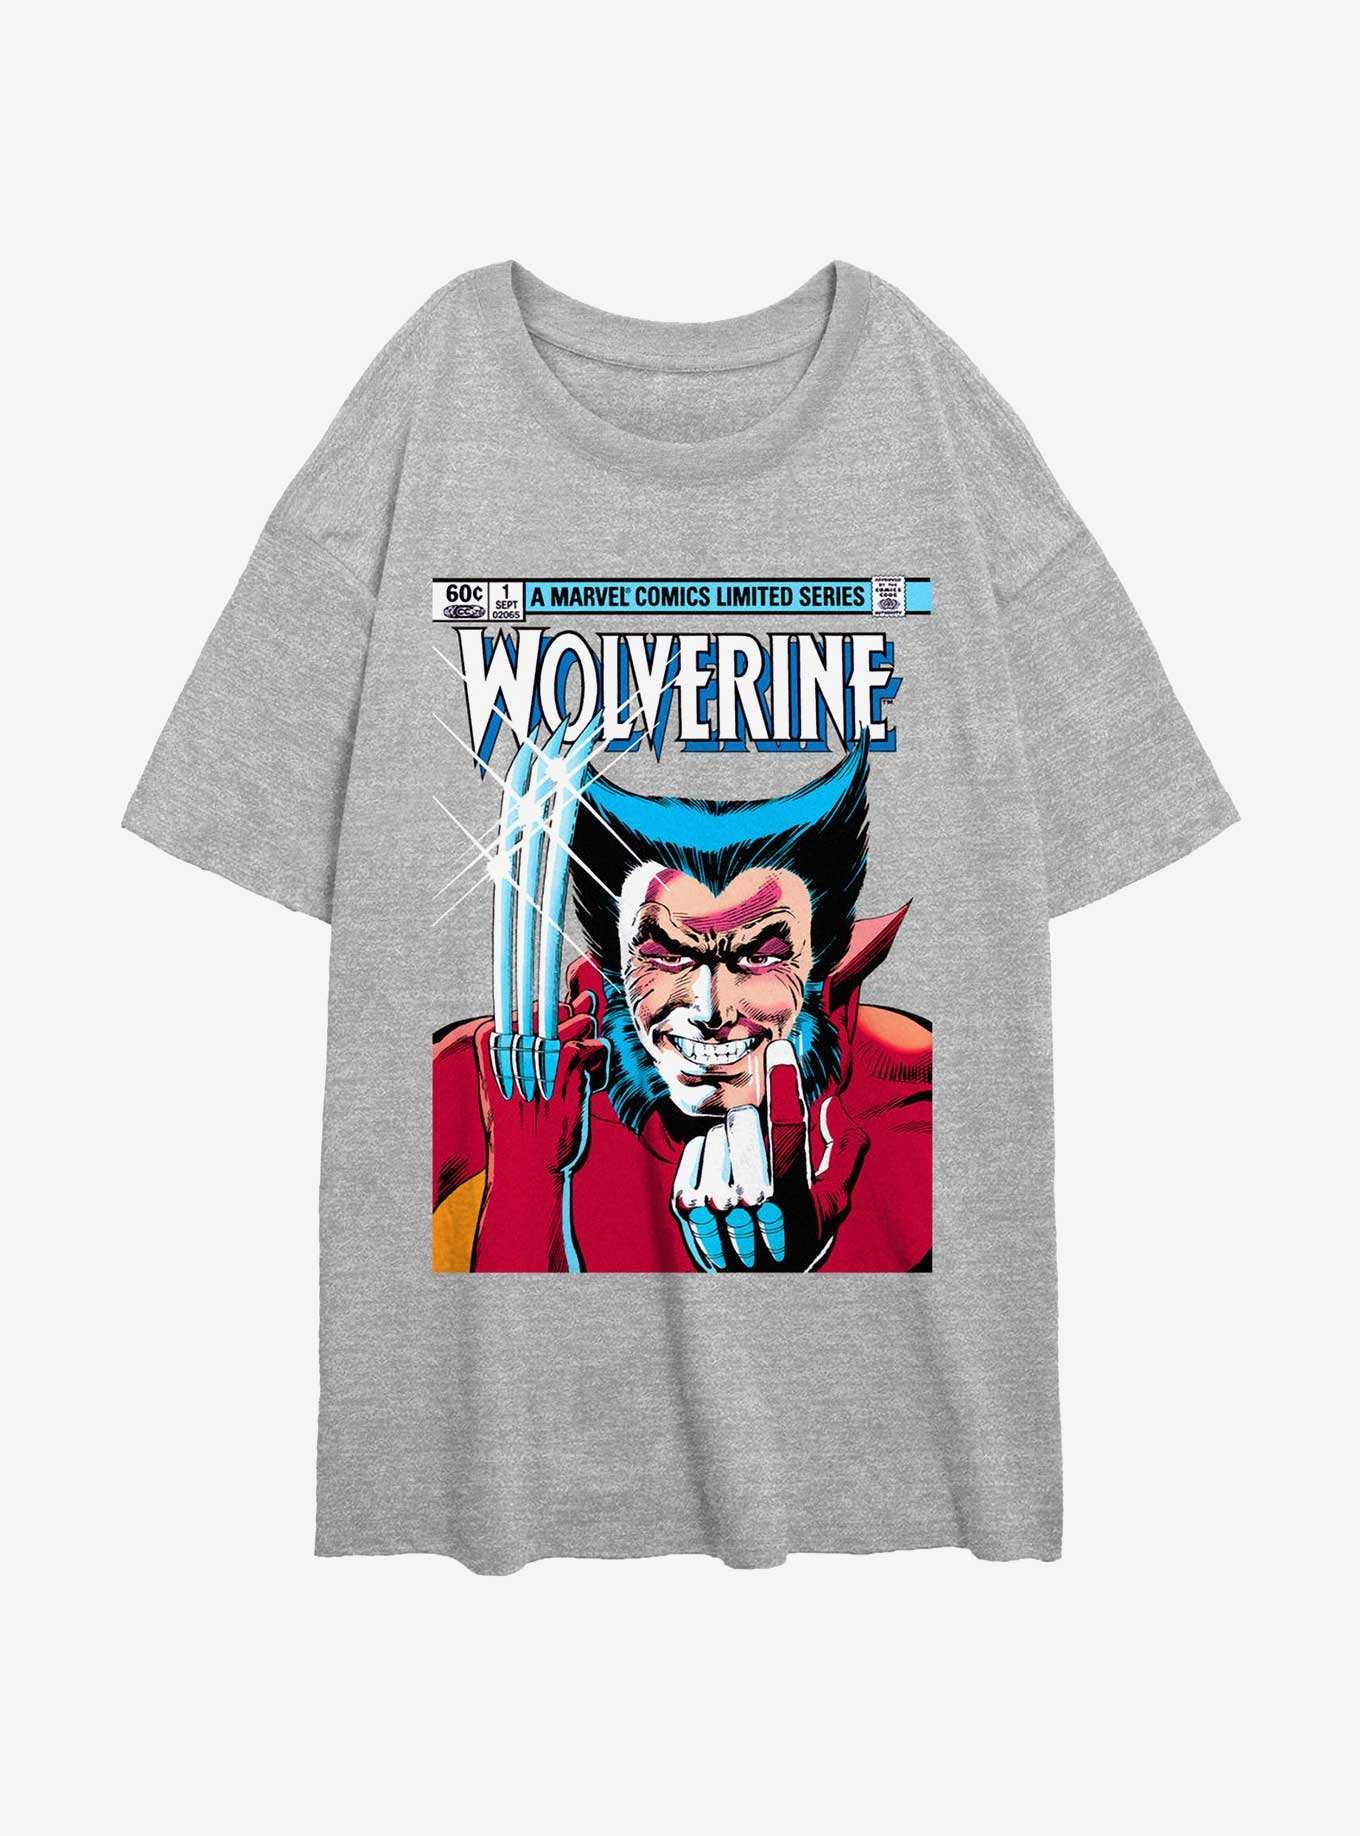 Wolverine 1st Issue Comic Cover Girls Oversized T-Shirt, , hi-res